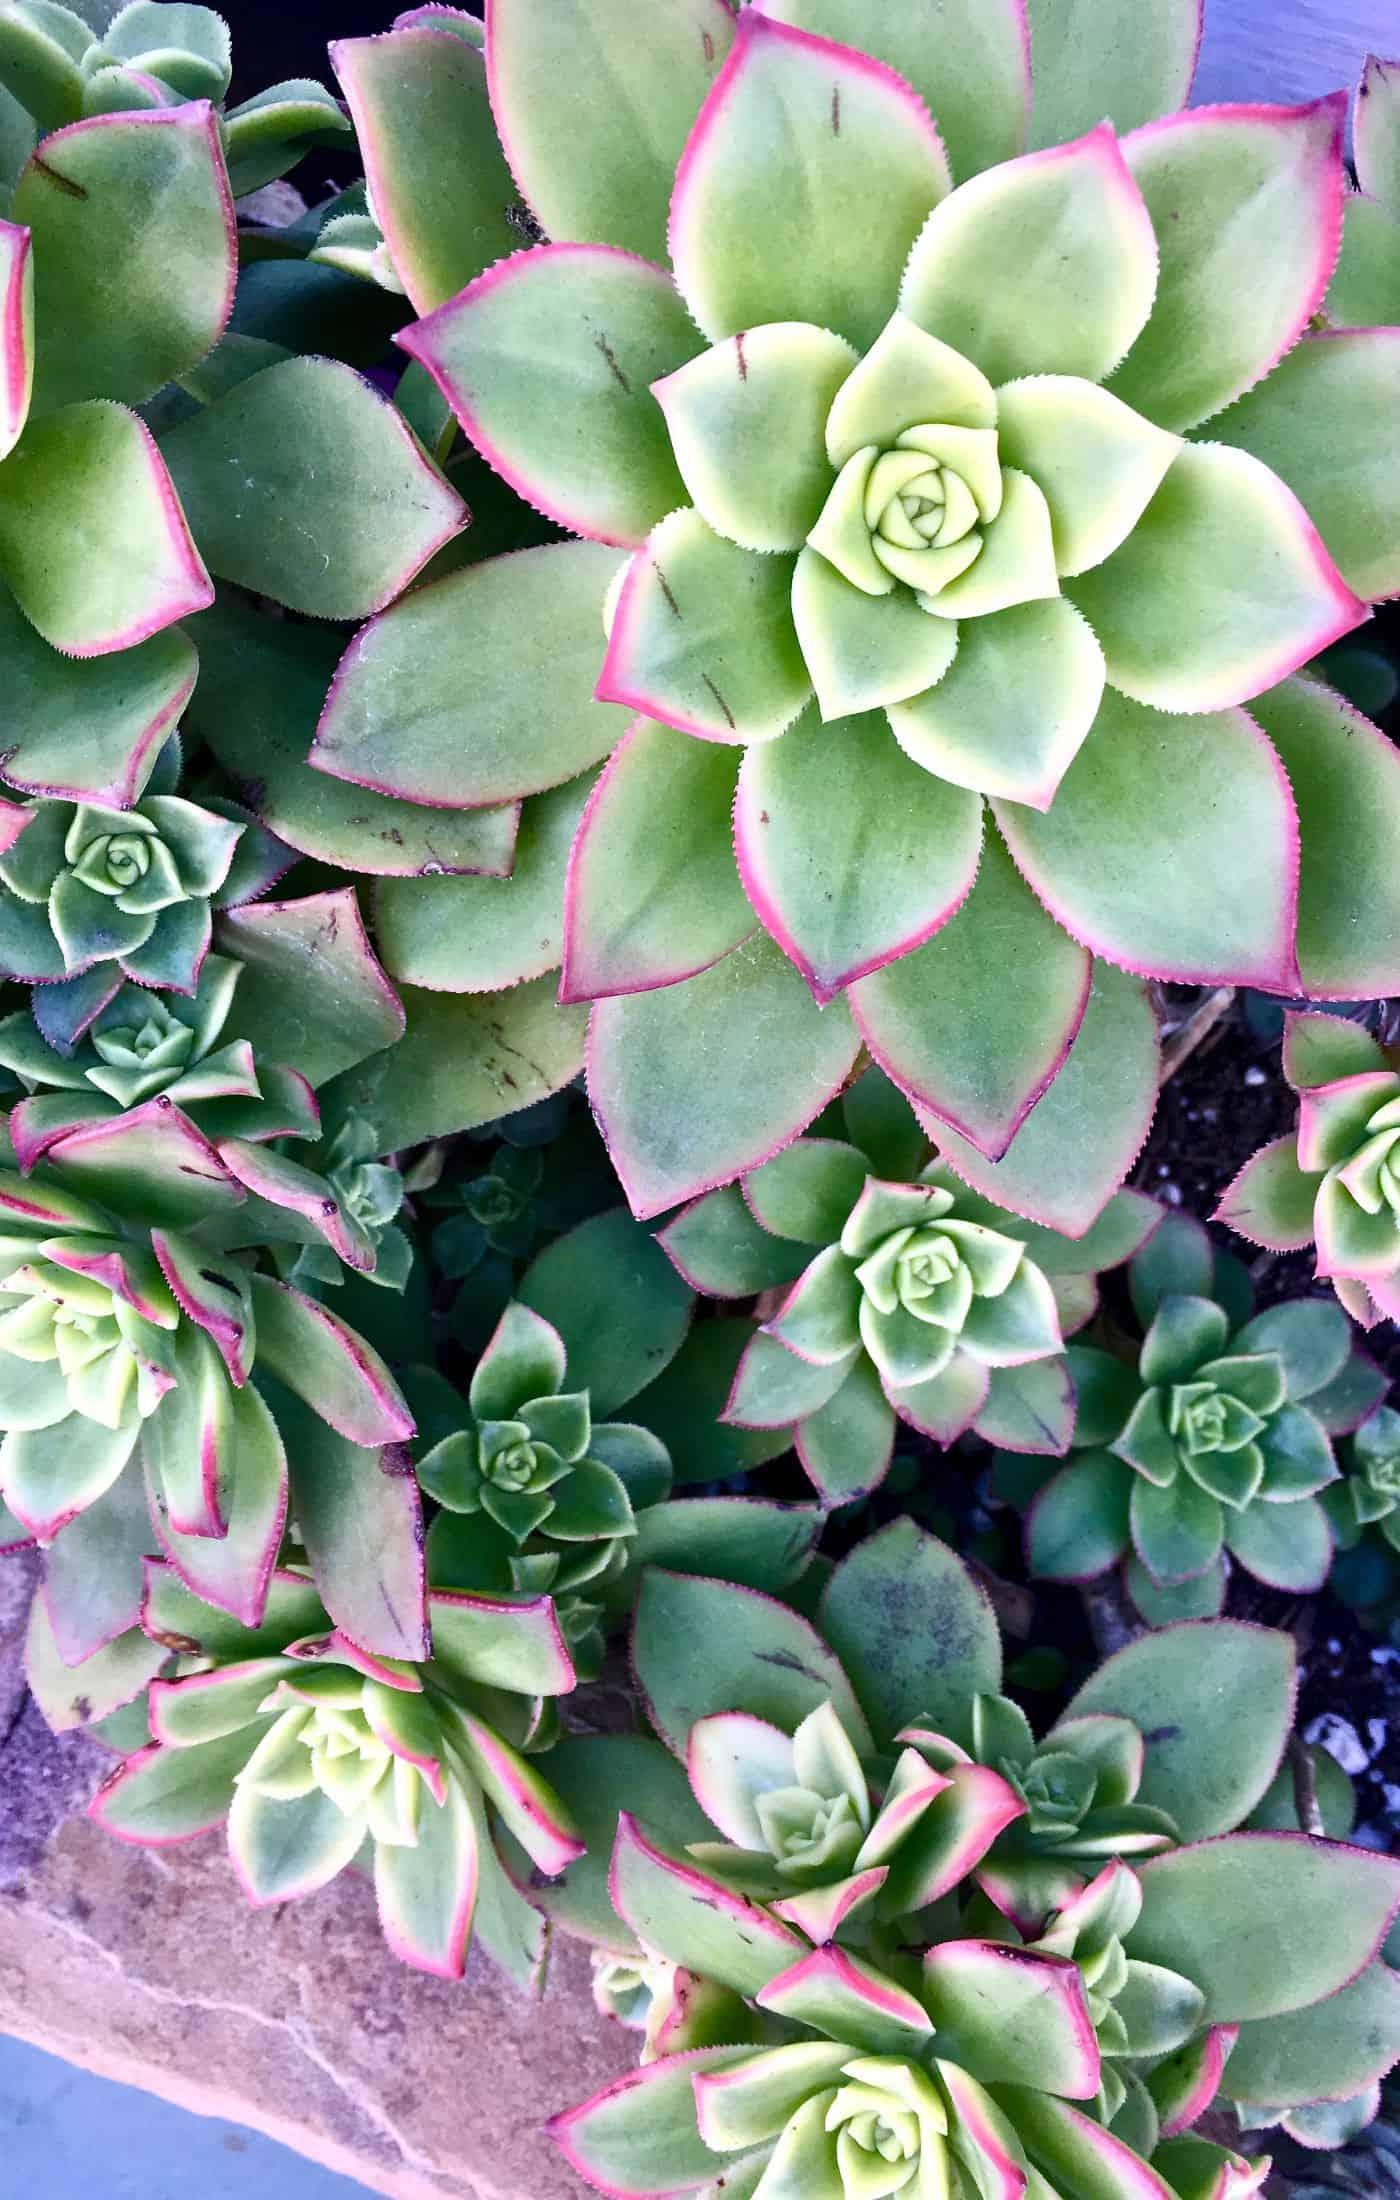 How to grow succulents